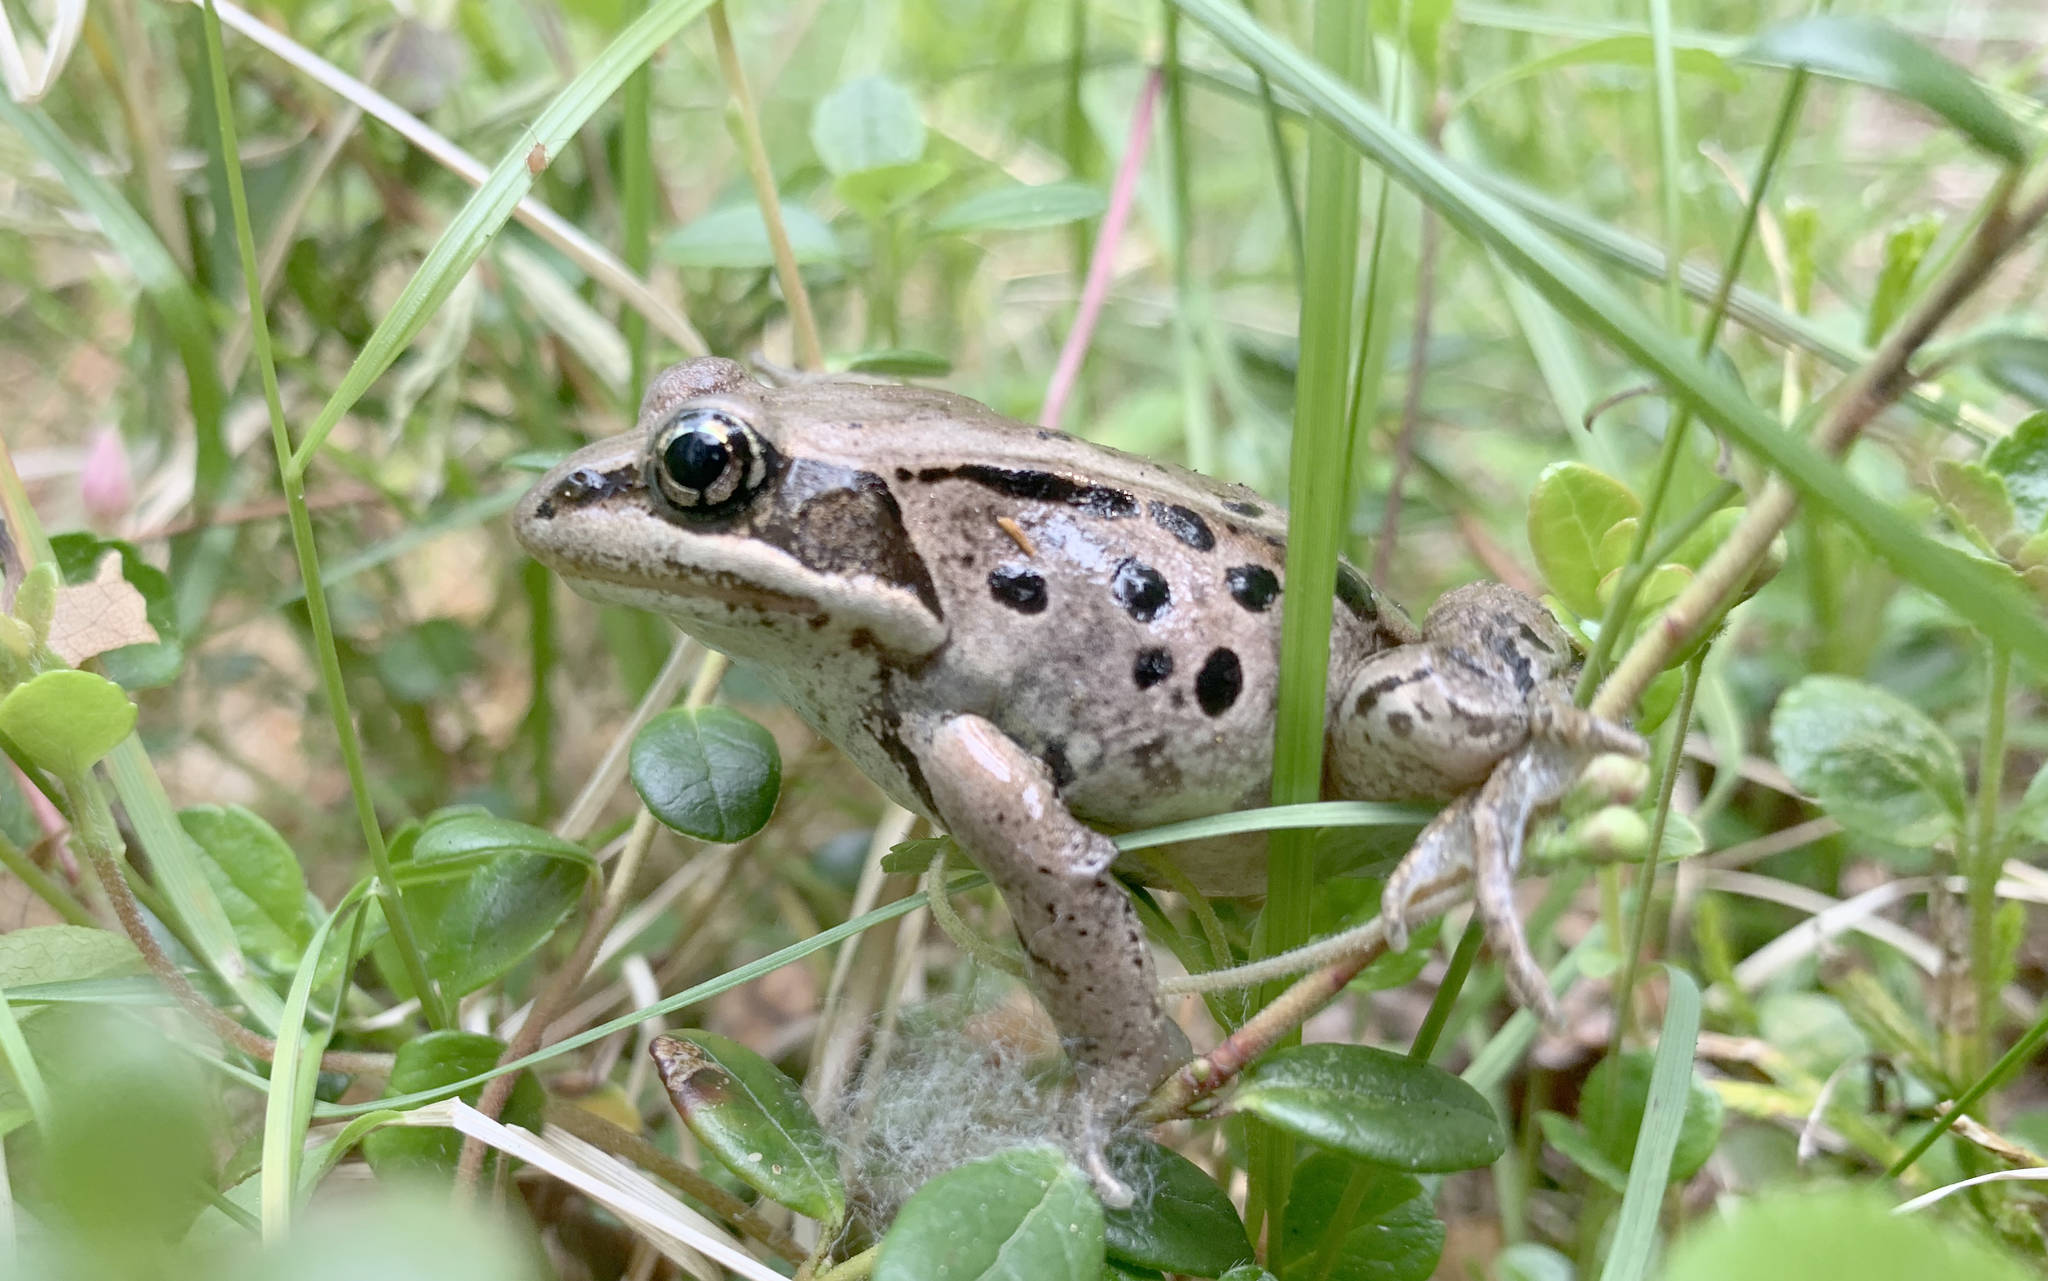 Wood frogs have antifreeze in their blood that allows survival in below-freezing temperatures in winter. (Photo by Colin Canterbury/Kenai National Wildlife Refuge)